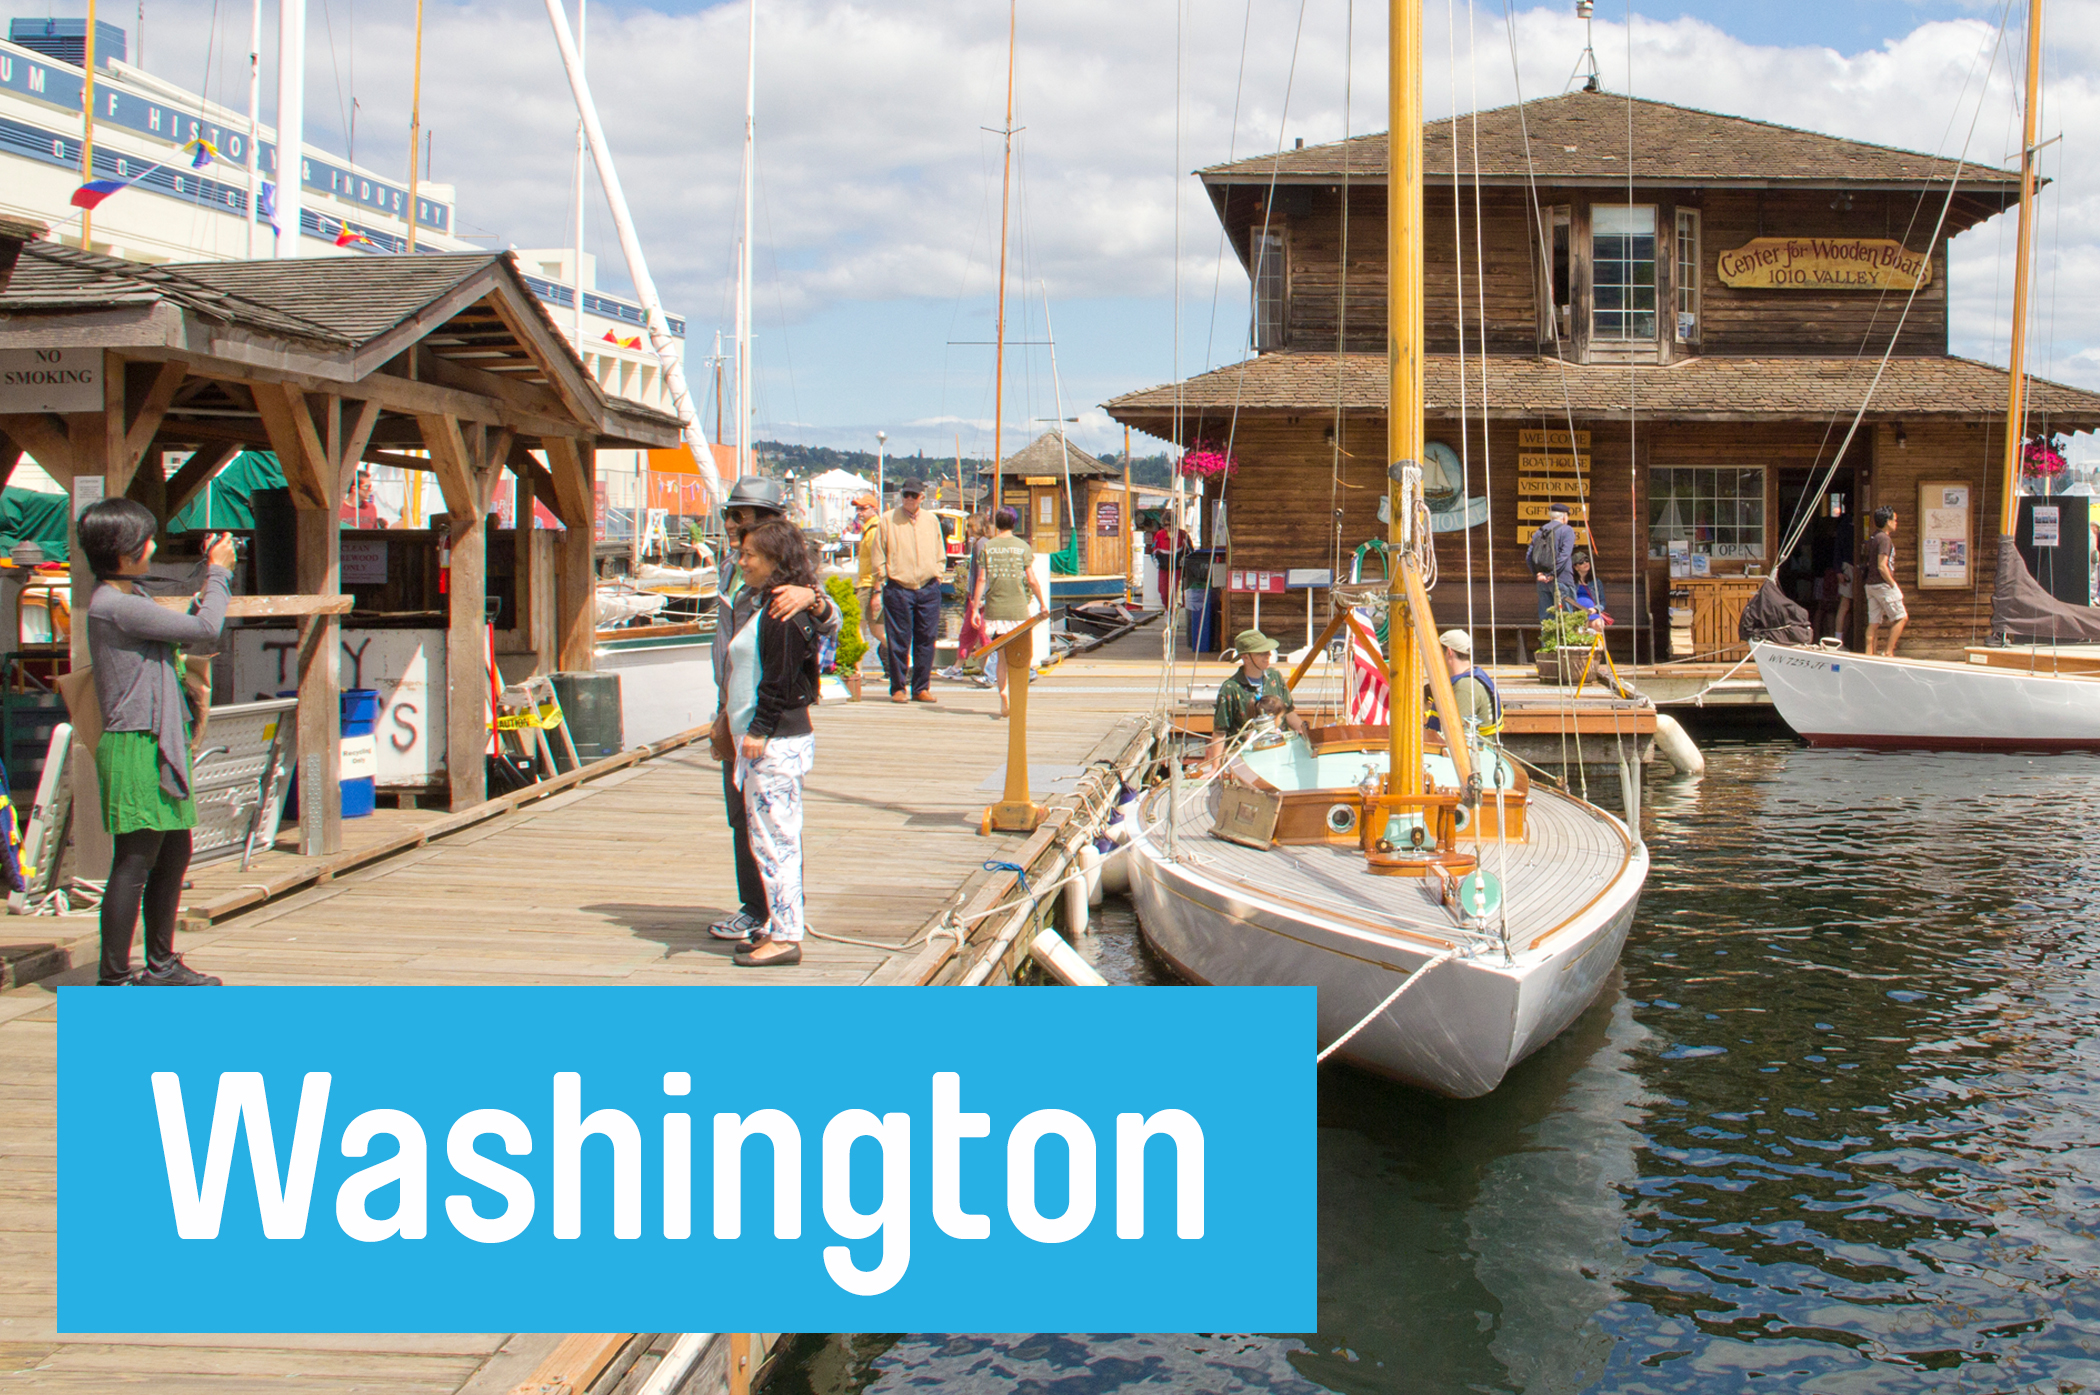 Take an hour sailboat cruise on Seattle’s shimmering Lake Union, free every Sunday with the <a href="http://cwb.org/events/cast-off/" target="_blank">Center for Wooden Boats.</a>